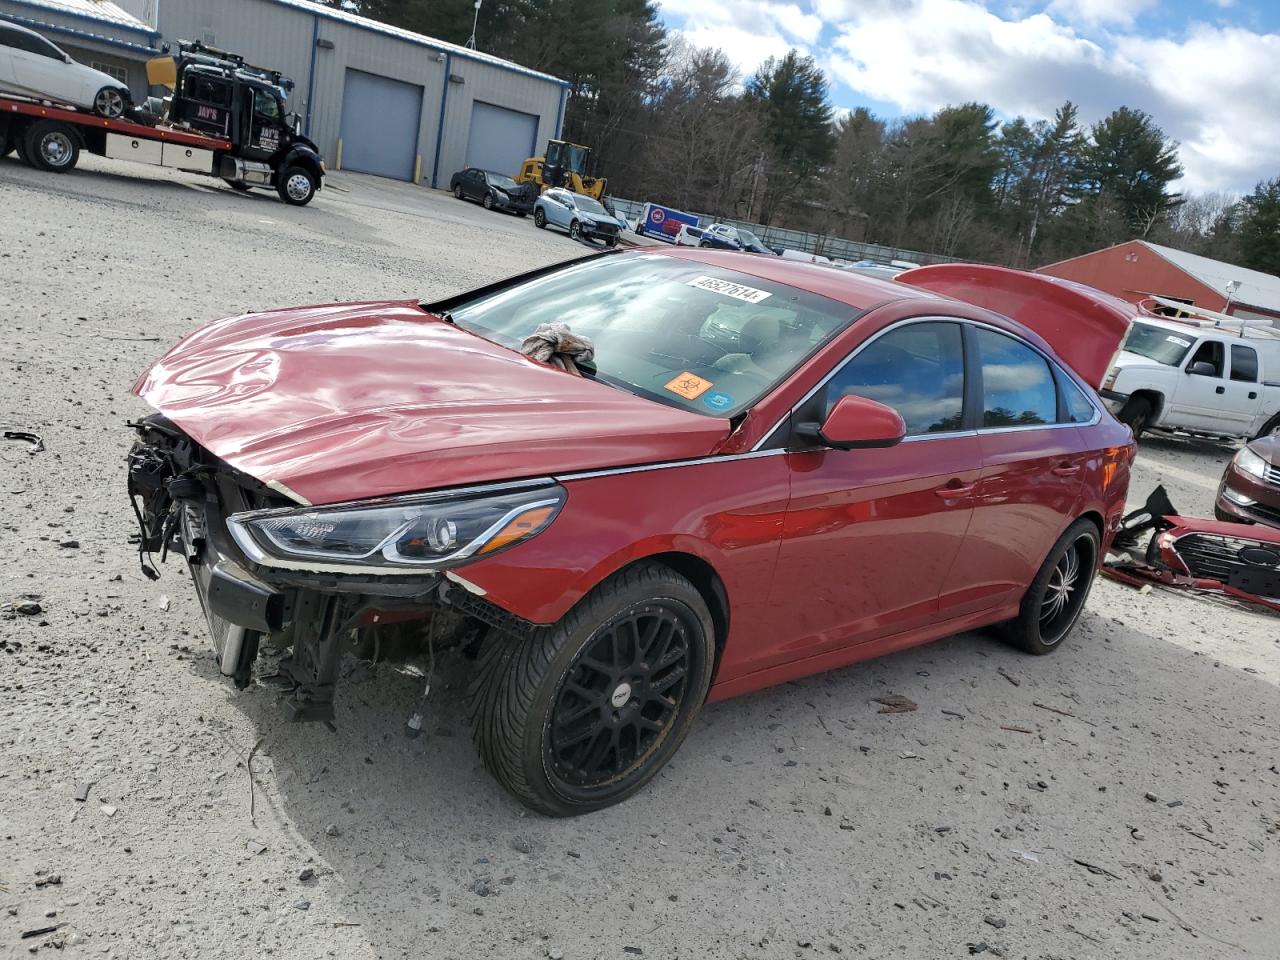 vin: 5NPE24AF8JH616981 5NPE24AF8JH616981 2018 hyundai sonata 2400 for Sale in 01756 1102, Ma - South Boston, Mendon, USA